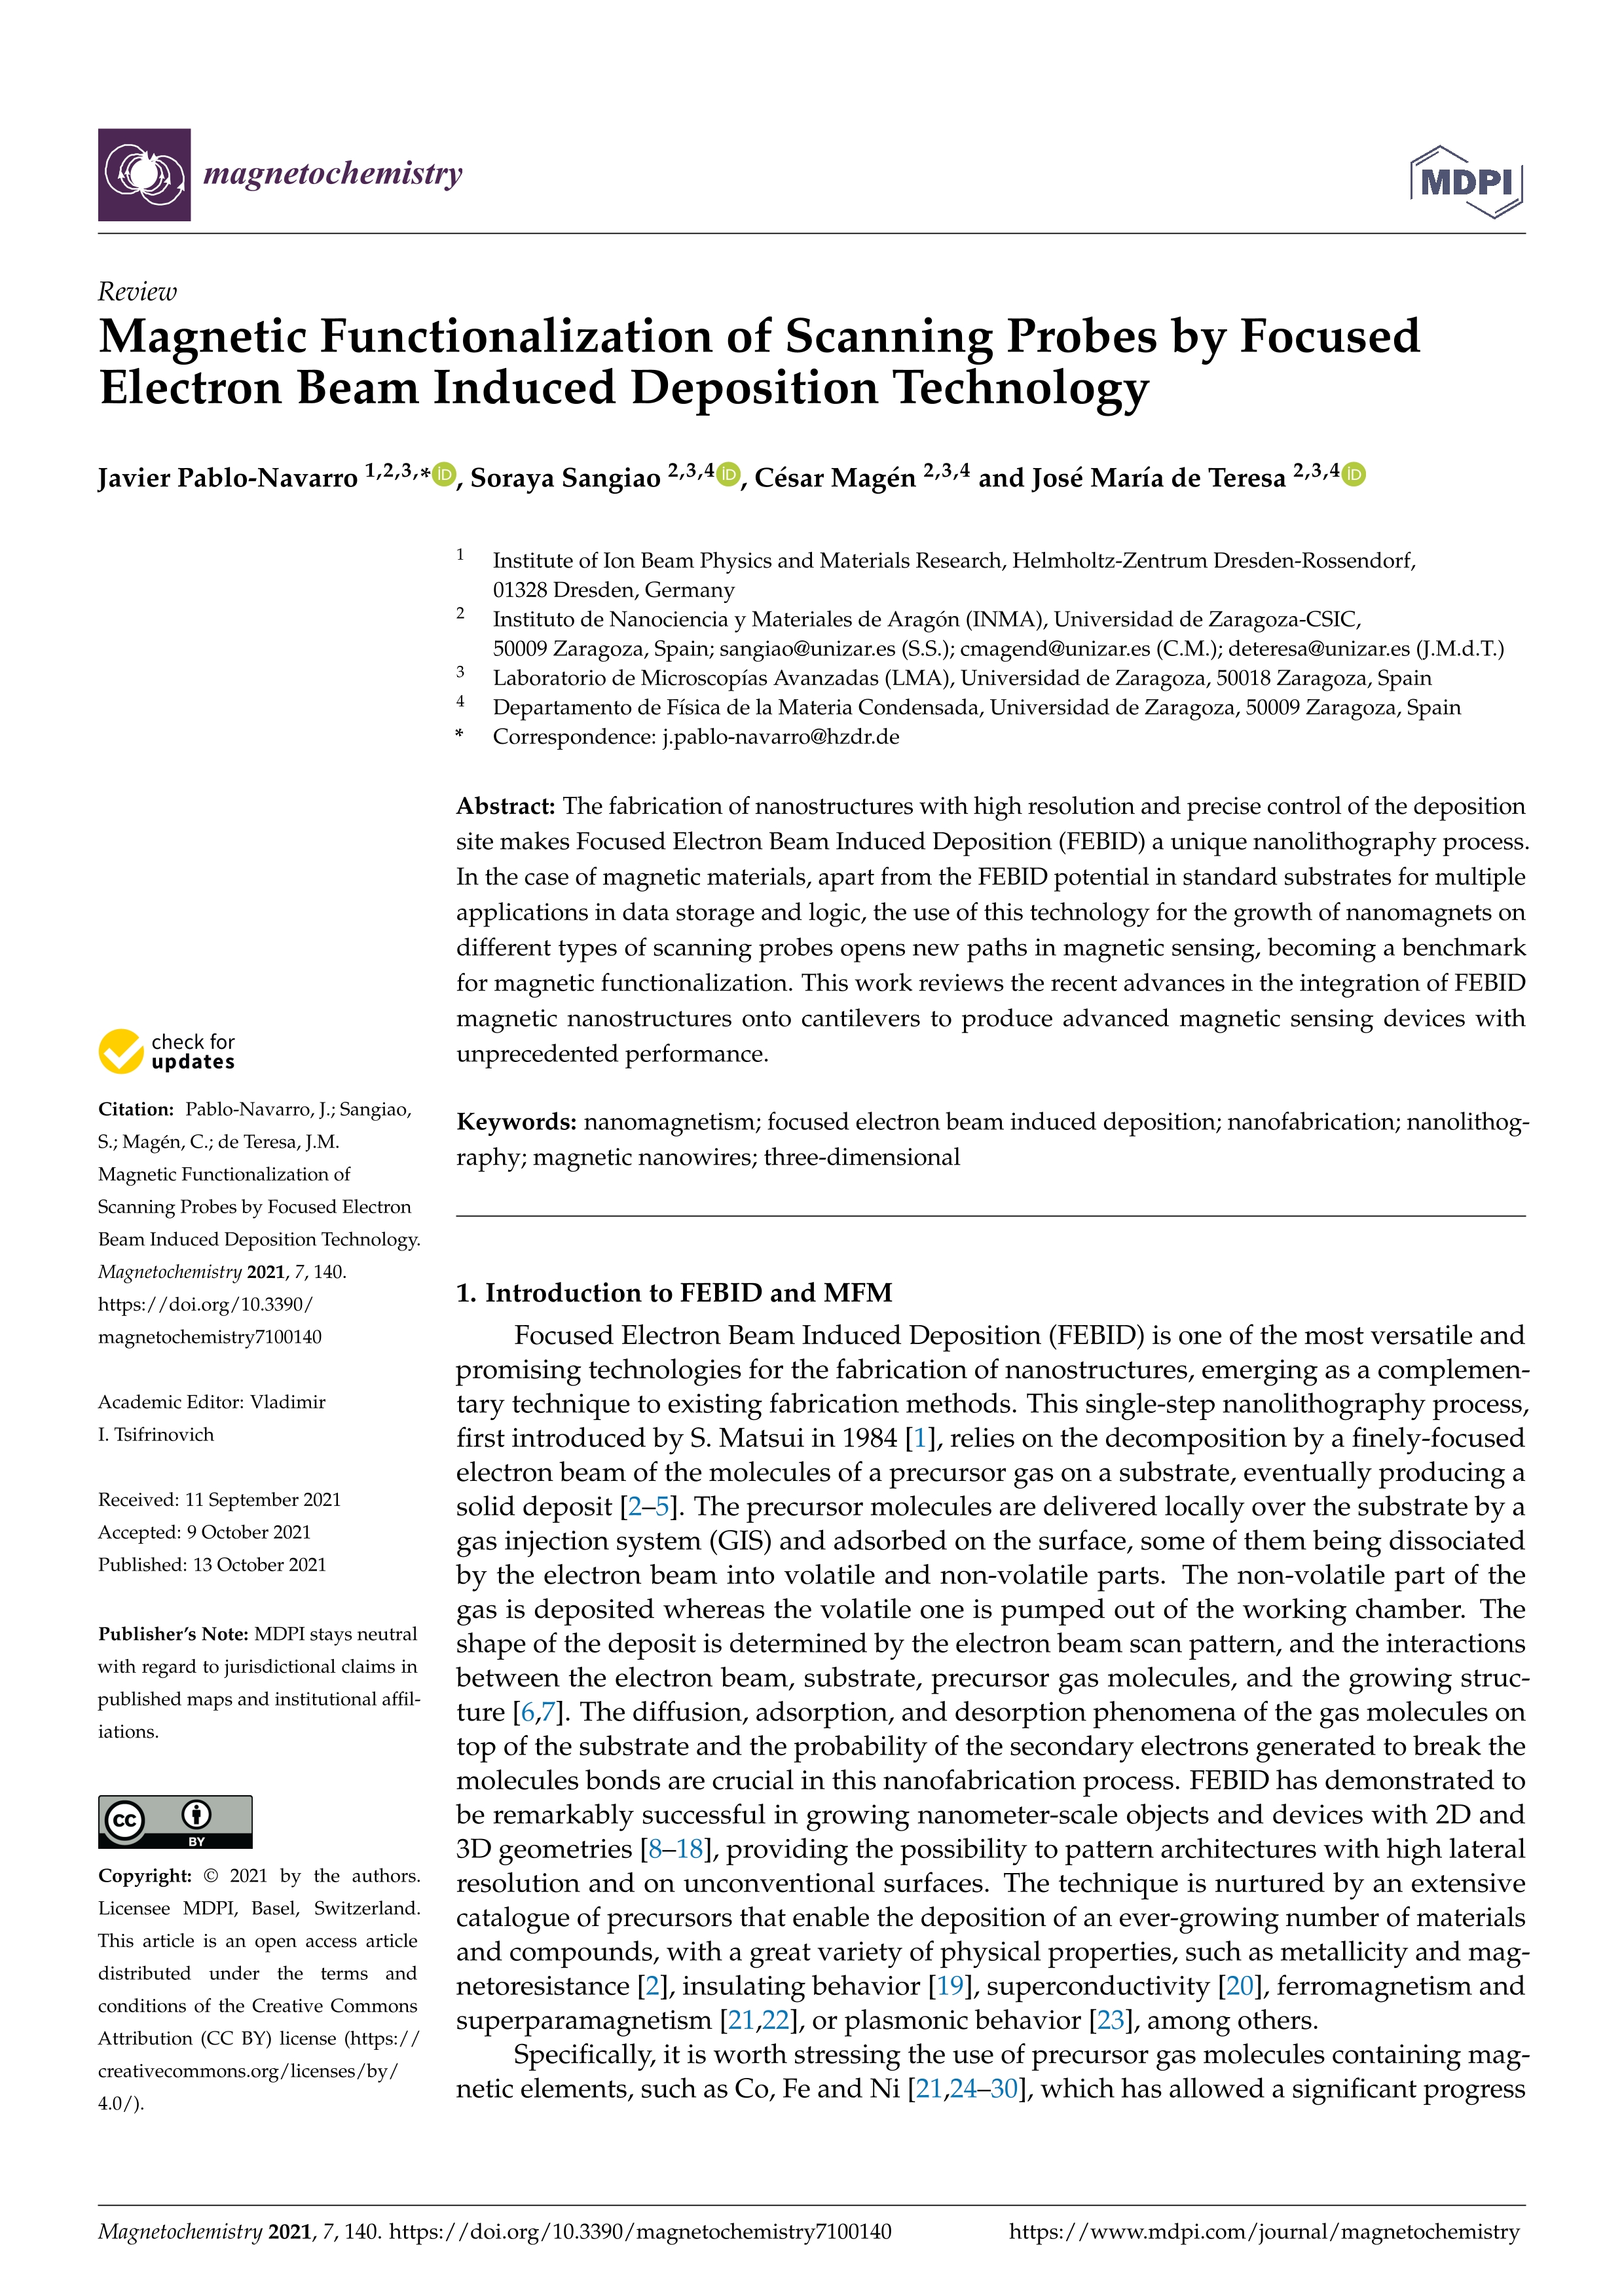 Magnetic functionalization of scanning probes by focused electron beam induced deposition technology